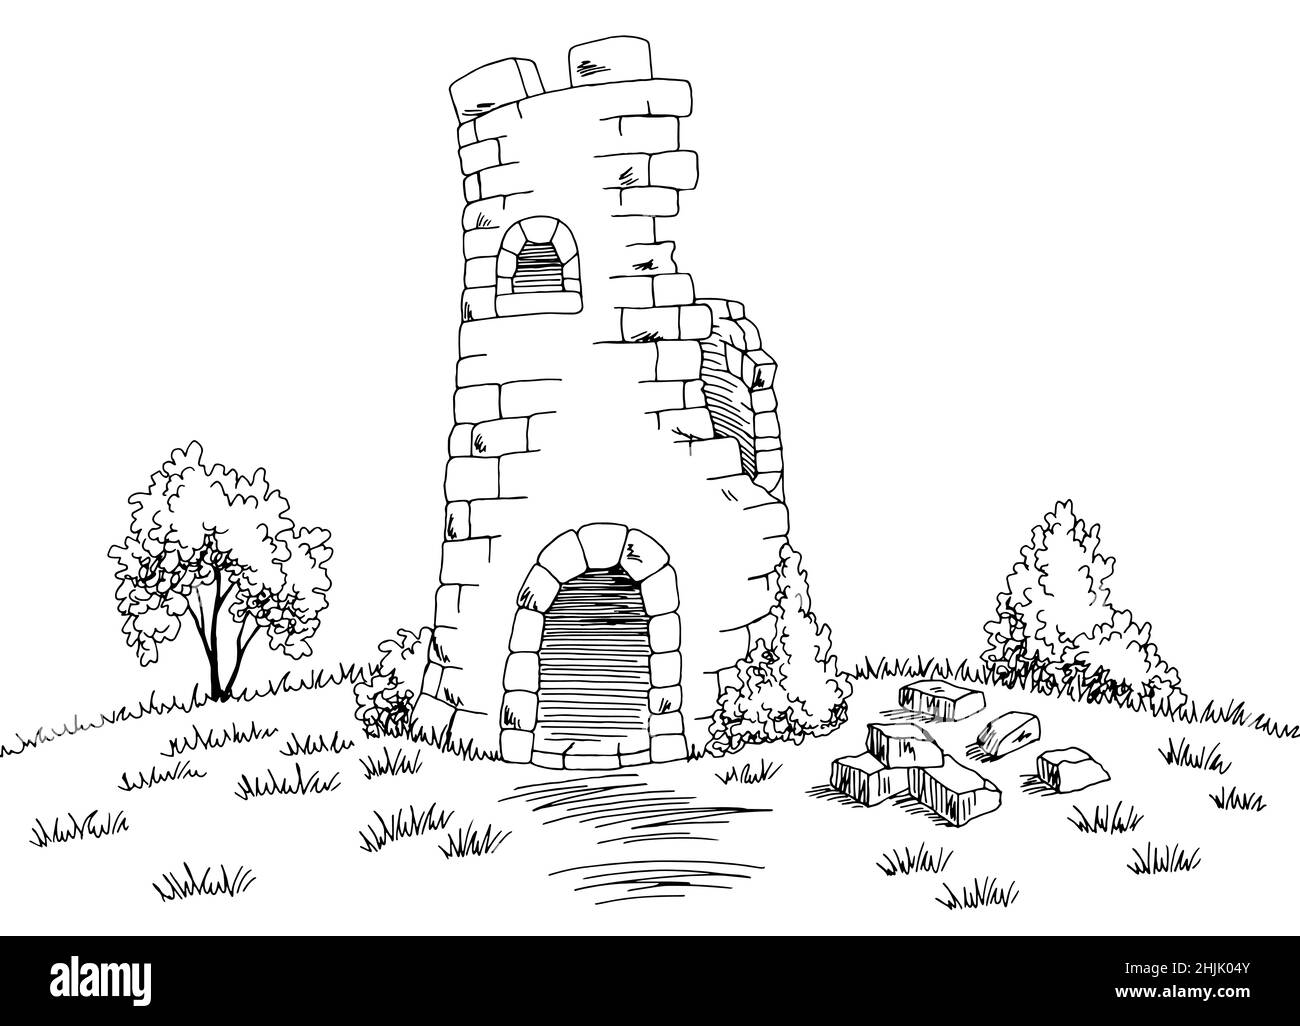 Ruined tower medieval graphic black white sketch illustration vector ...